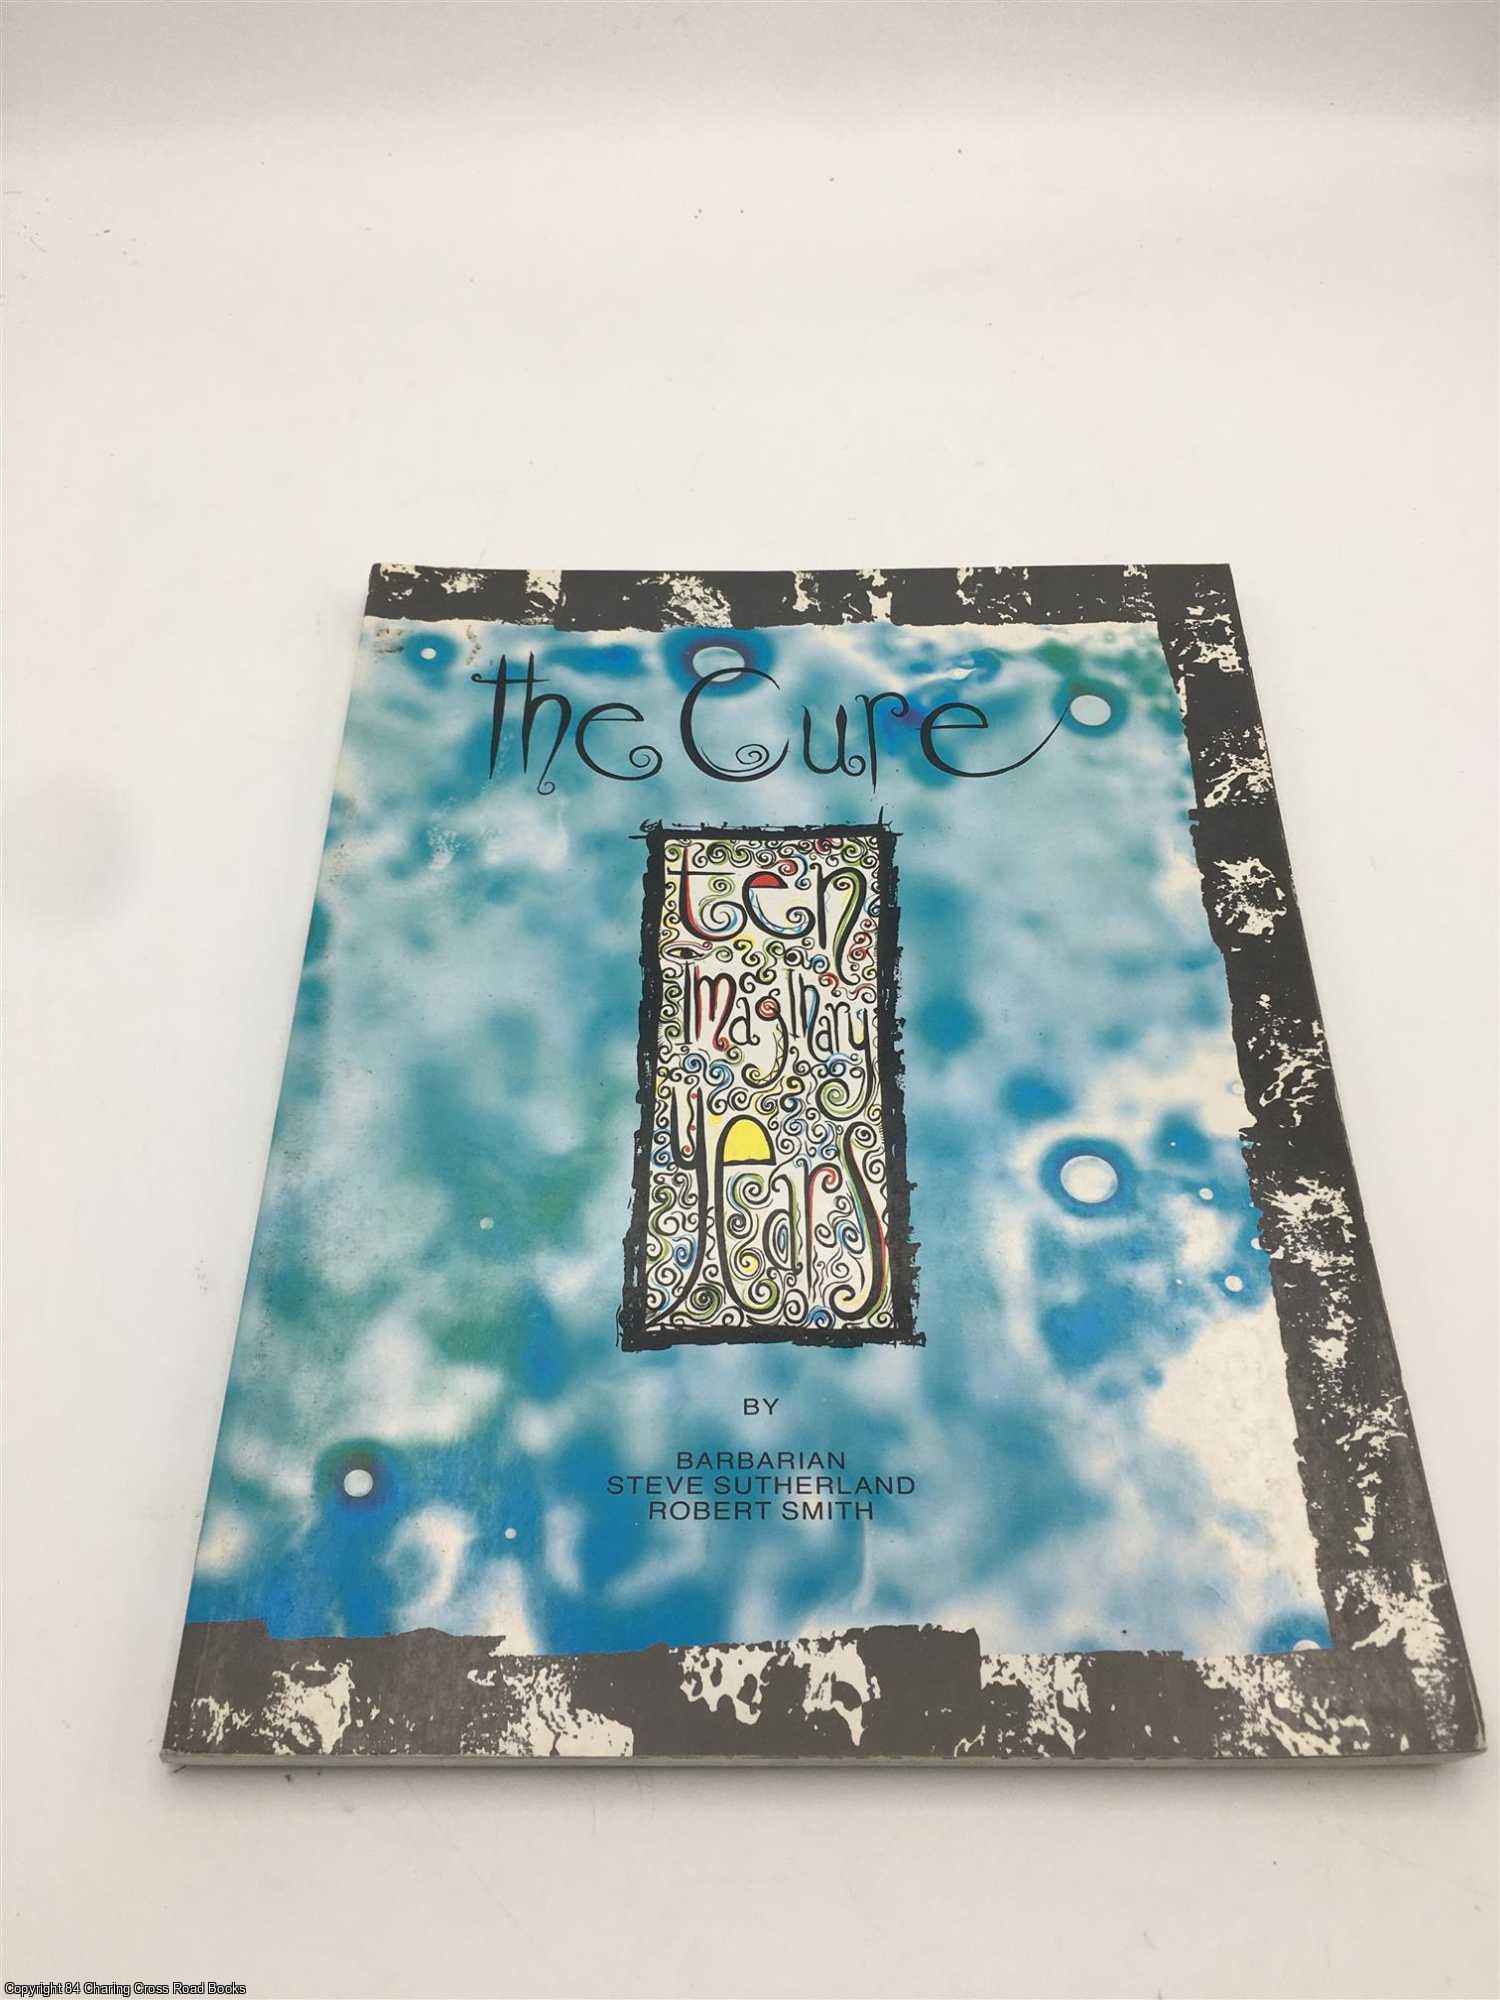 The Cure: Ten Imaginary Years | Barbarian, Robert Smith